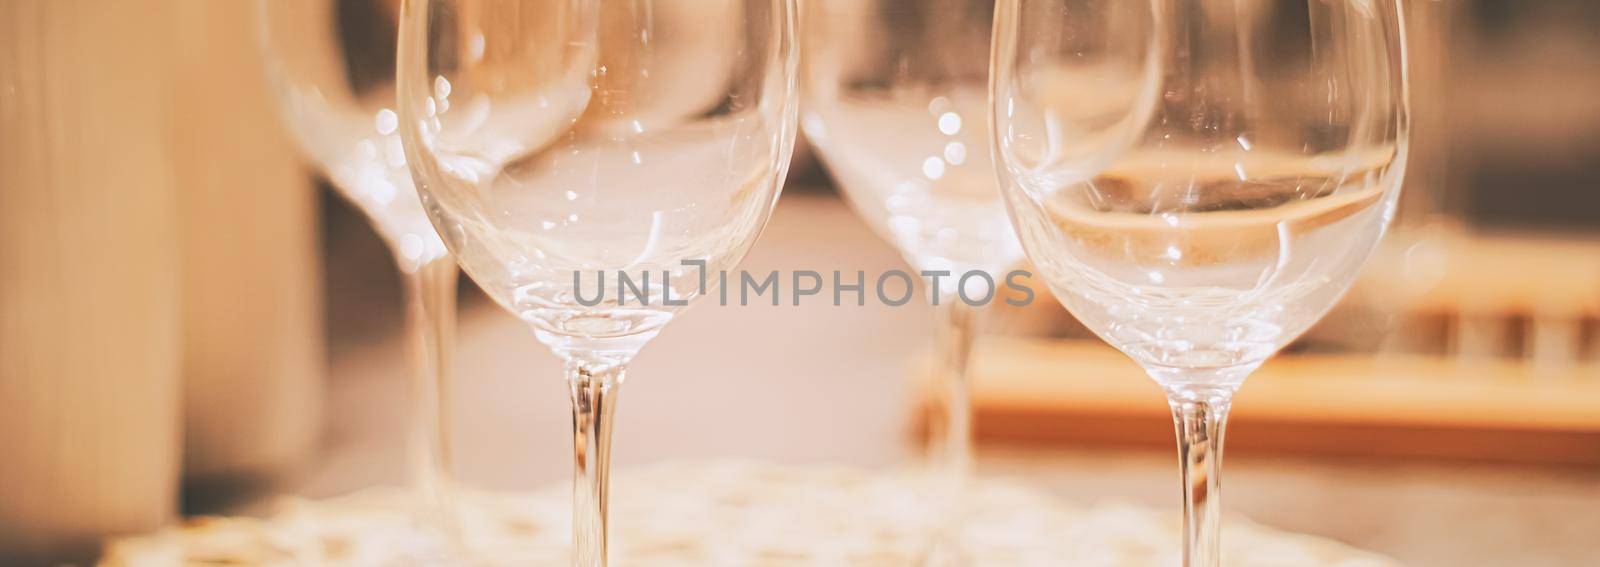 Wine glasses served for family dinner in the kitchen, home decor and luxury interior design by Anneleven